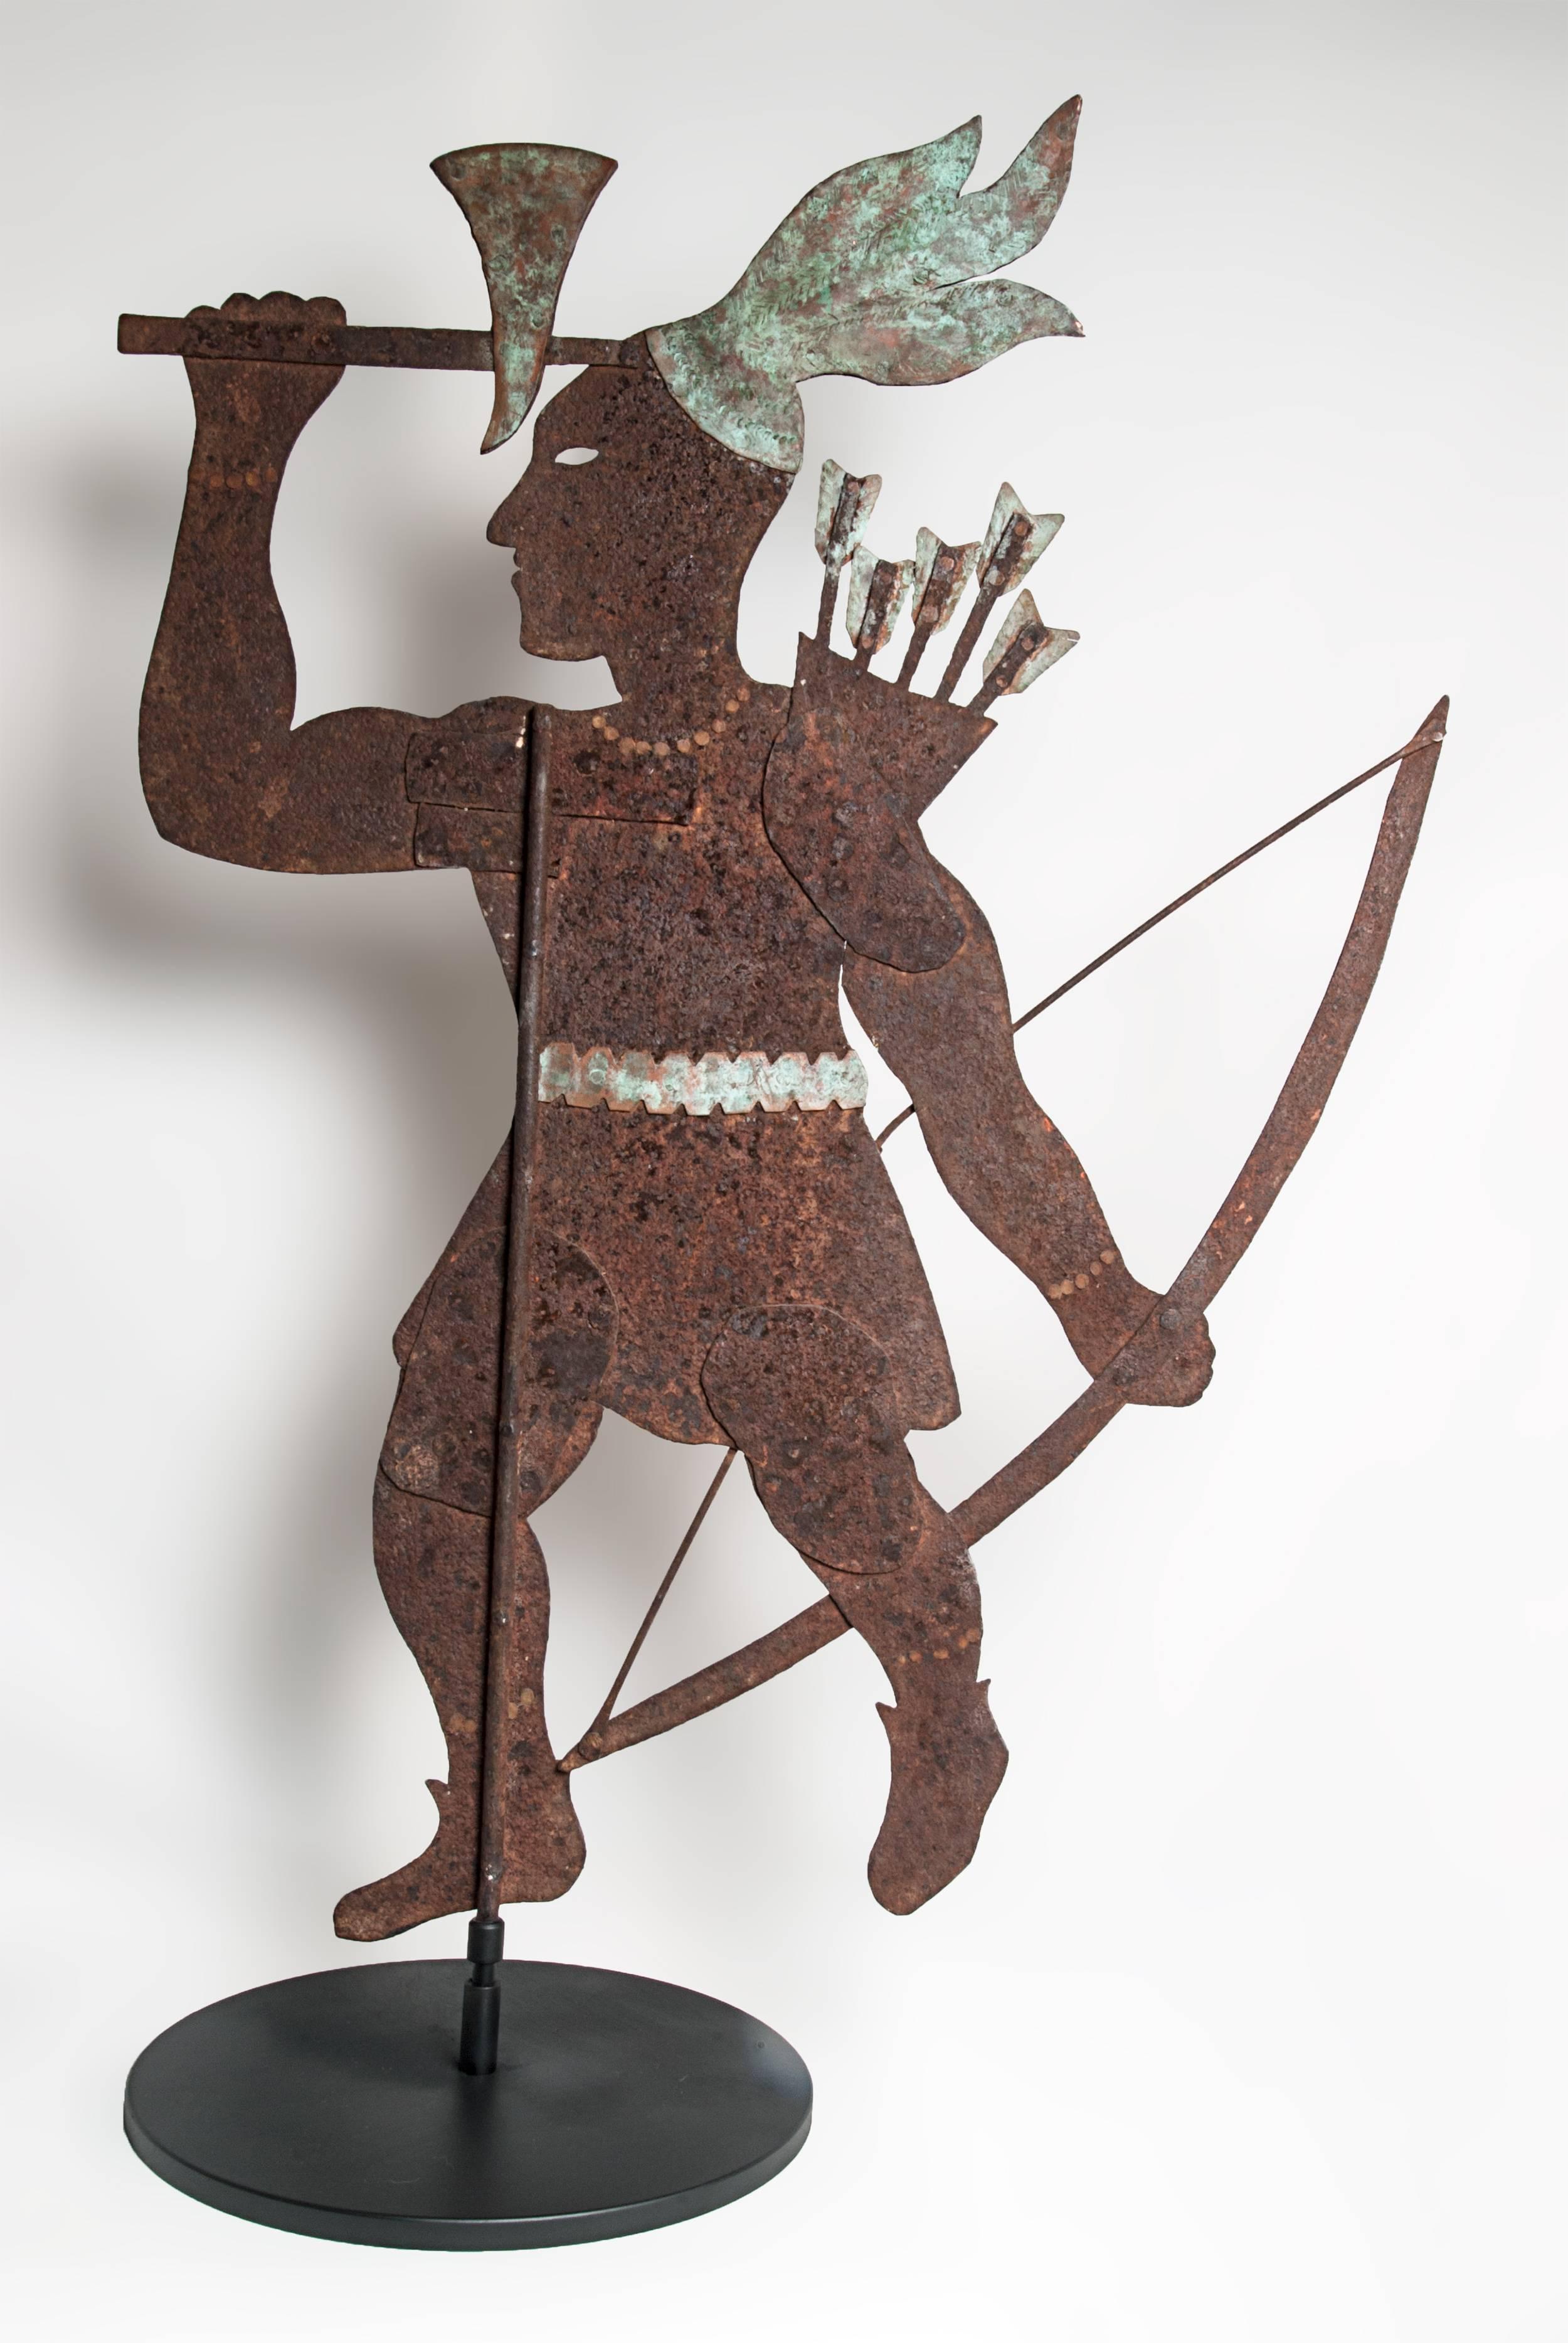 $4800
Silhouette Indian weathervane with cut-out eyes. Made of metal and copper. Constructed of multiple pieces of iron riveted together with sheet copper used for the hatchet, belt, arrows and feathers. Weathered and oxidized showing the natural